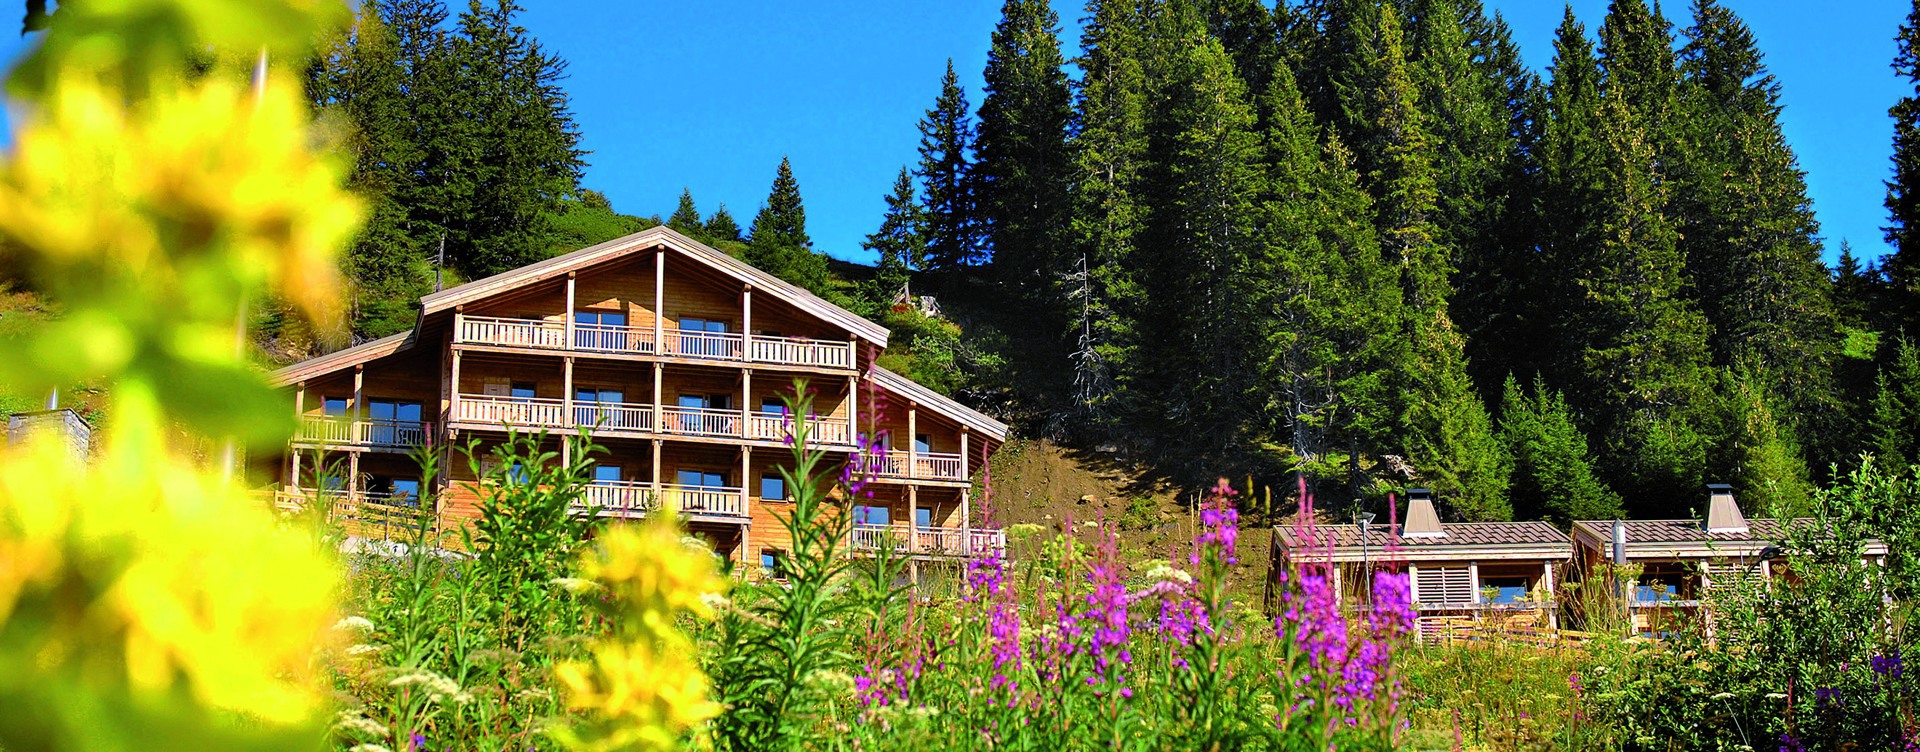 Enjoy a wonderful holiday in the French Alps